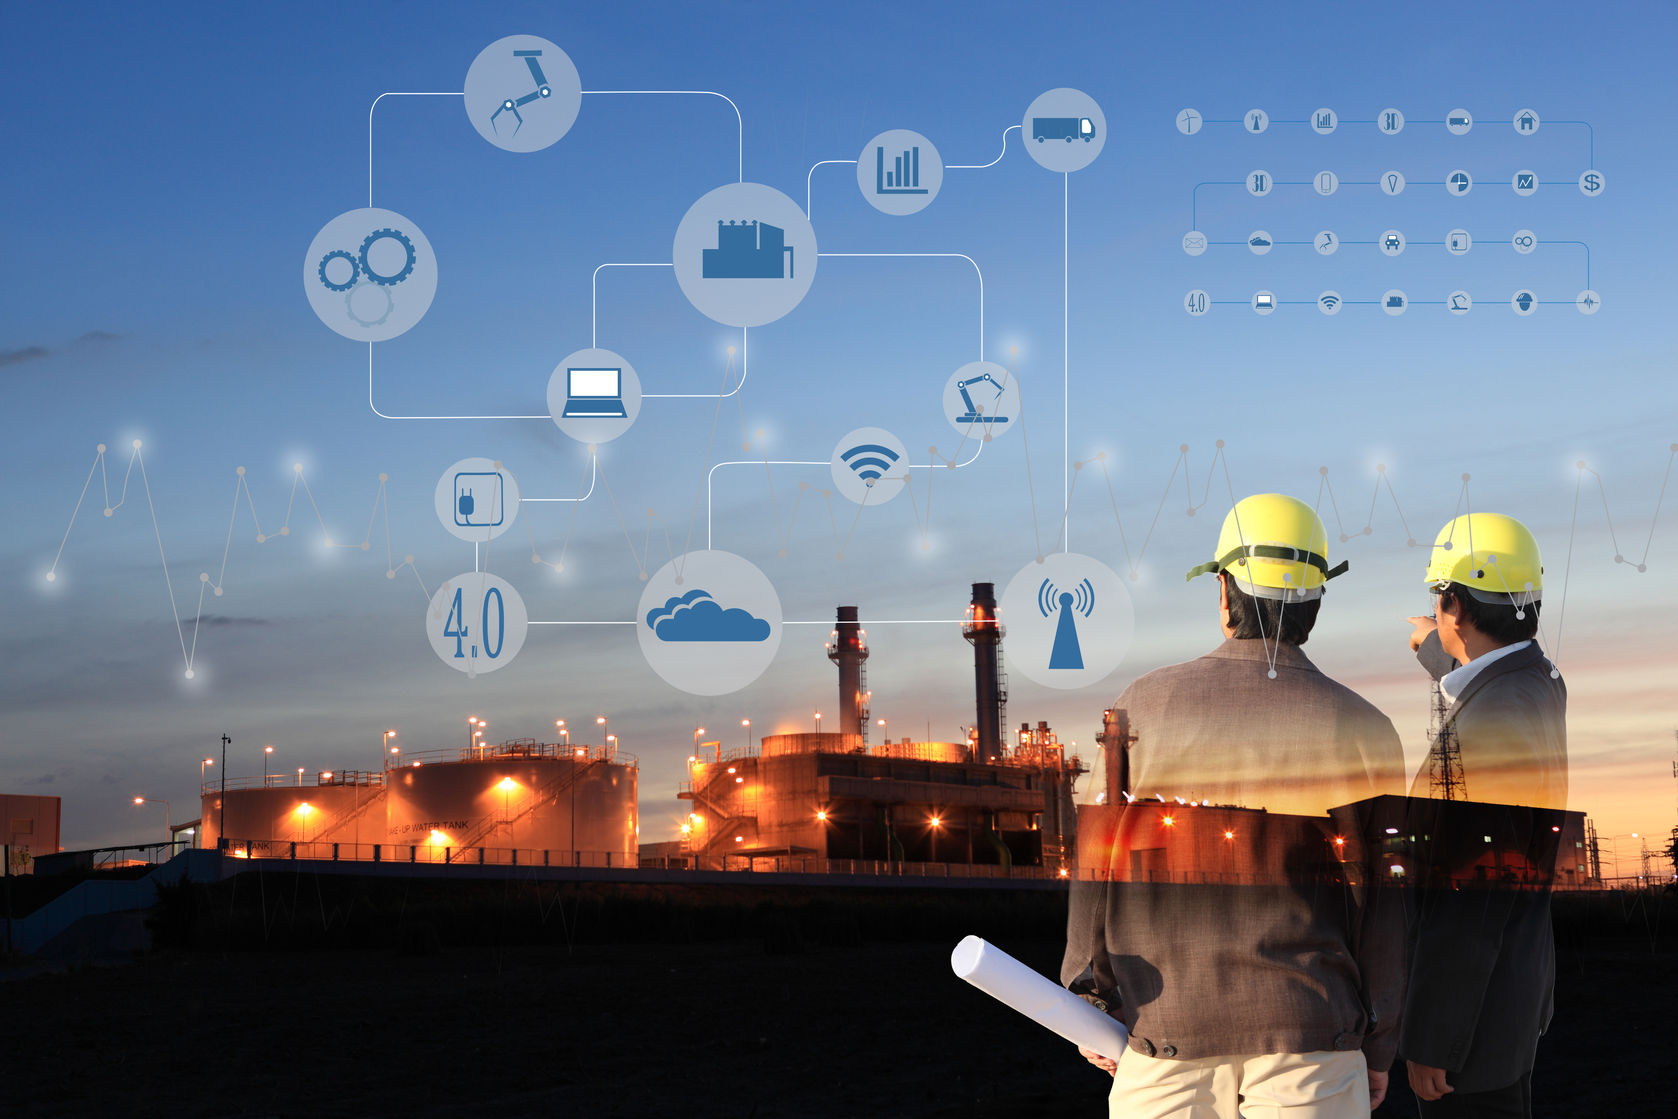 68949158 - two engineer on site , industry 4.0 concept image.oil refinery at twilight with cyber and physical system icons diagram on industrial factory and infrastructure background.